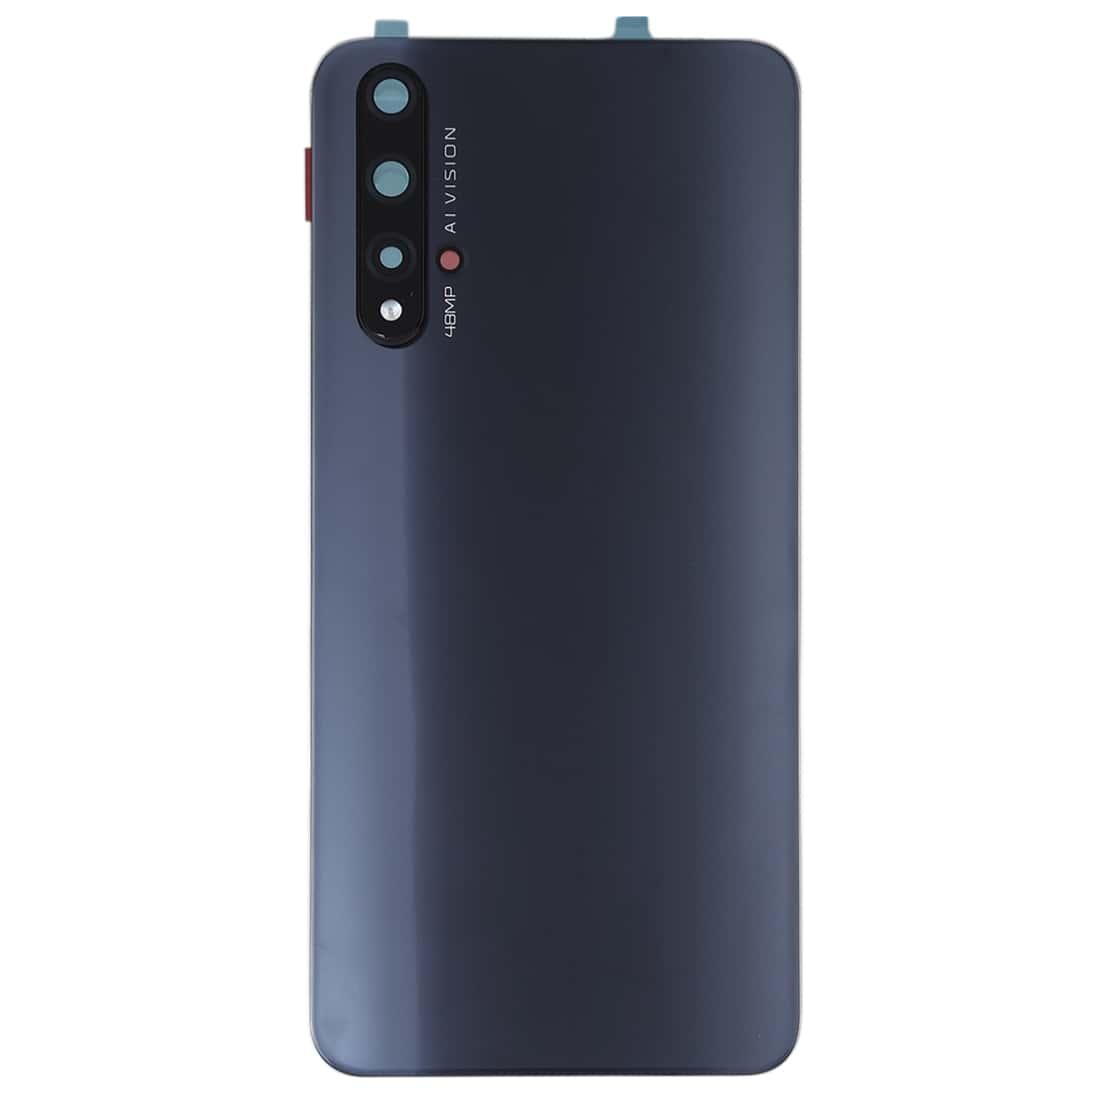 Back Glass Panel for Huawei Honor 20 Black with Camera Lens